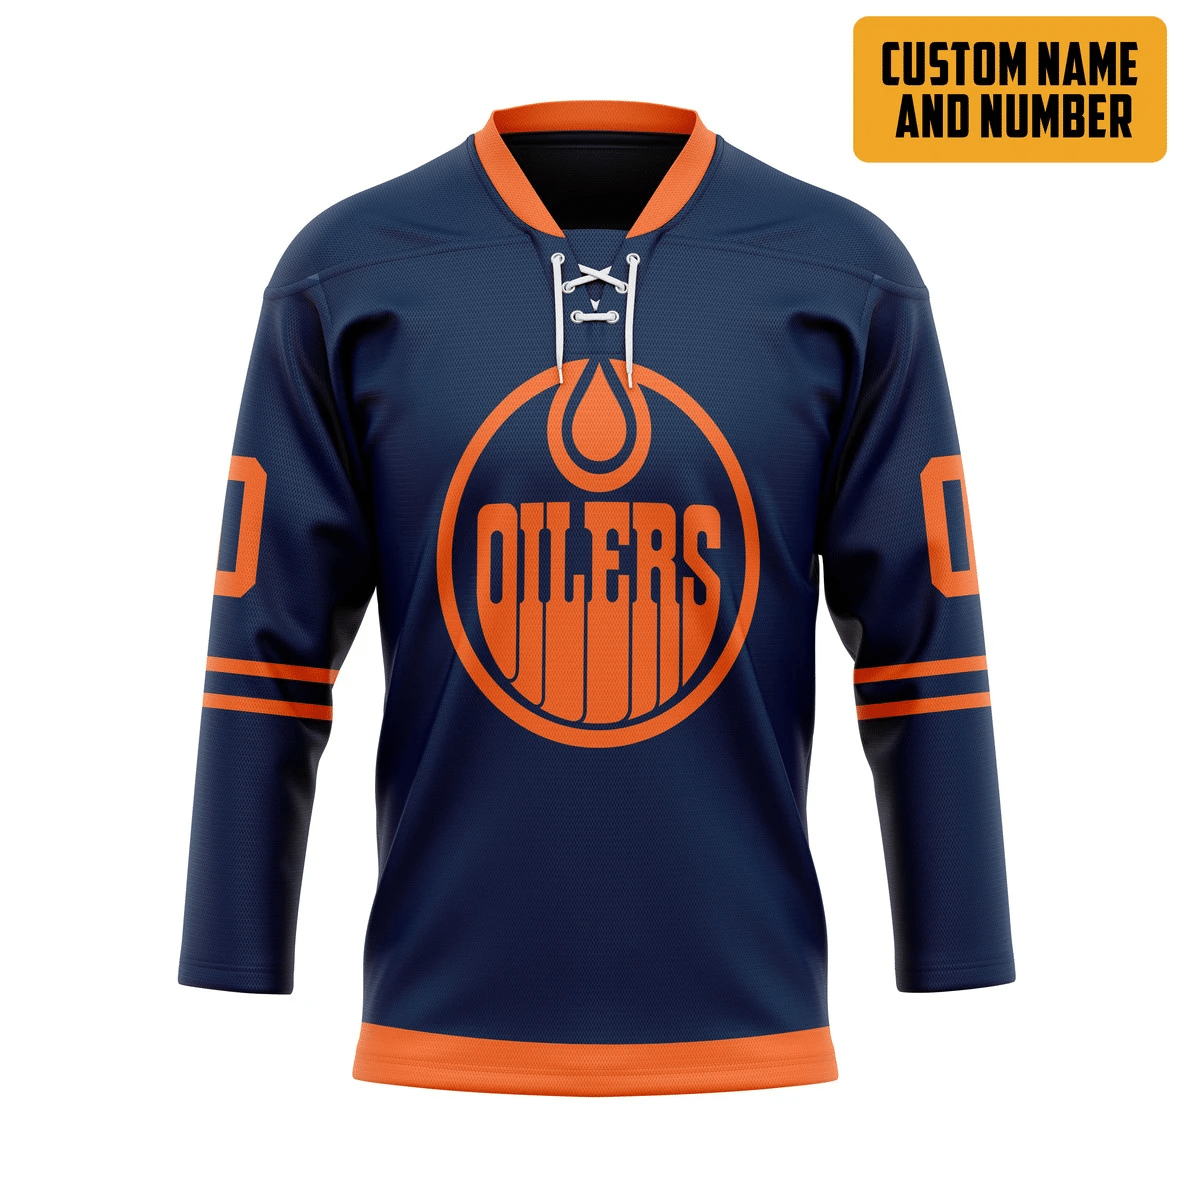 Top cool Hockey jersey for fan You can buy online. 7